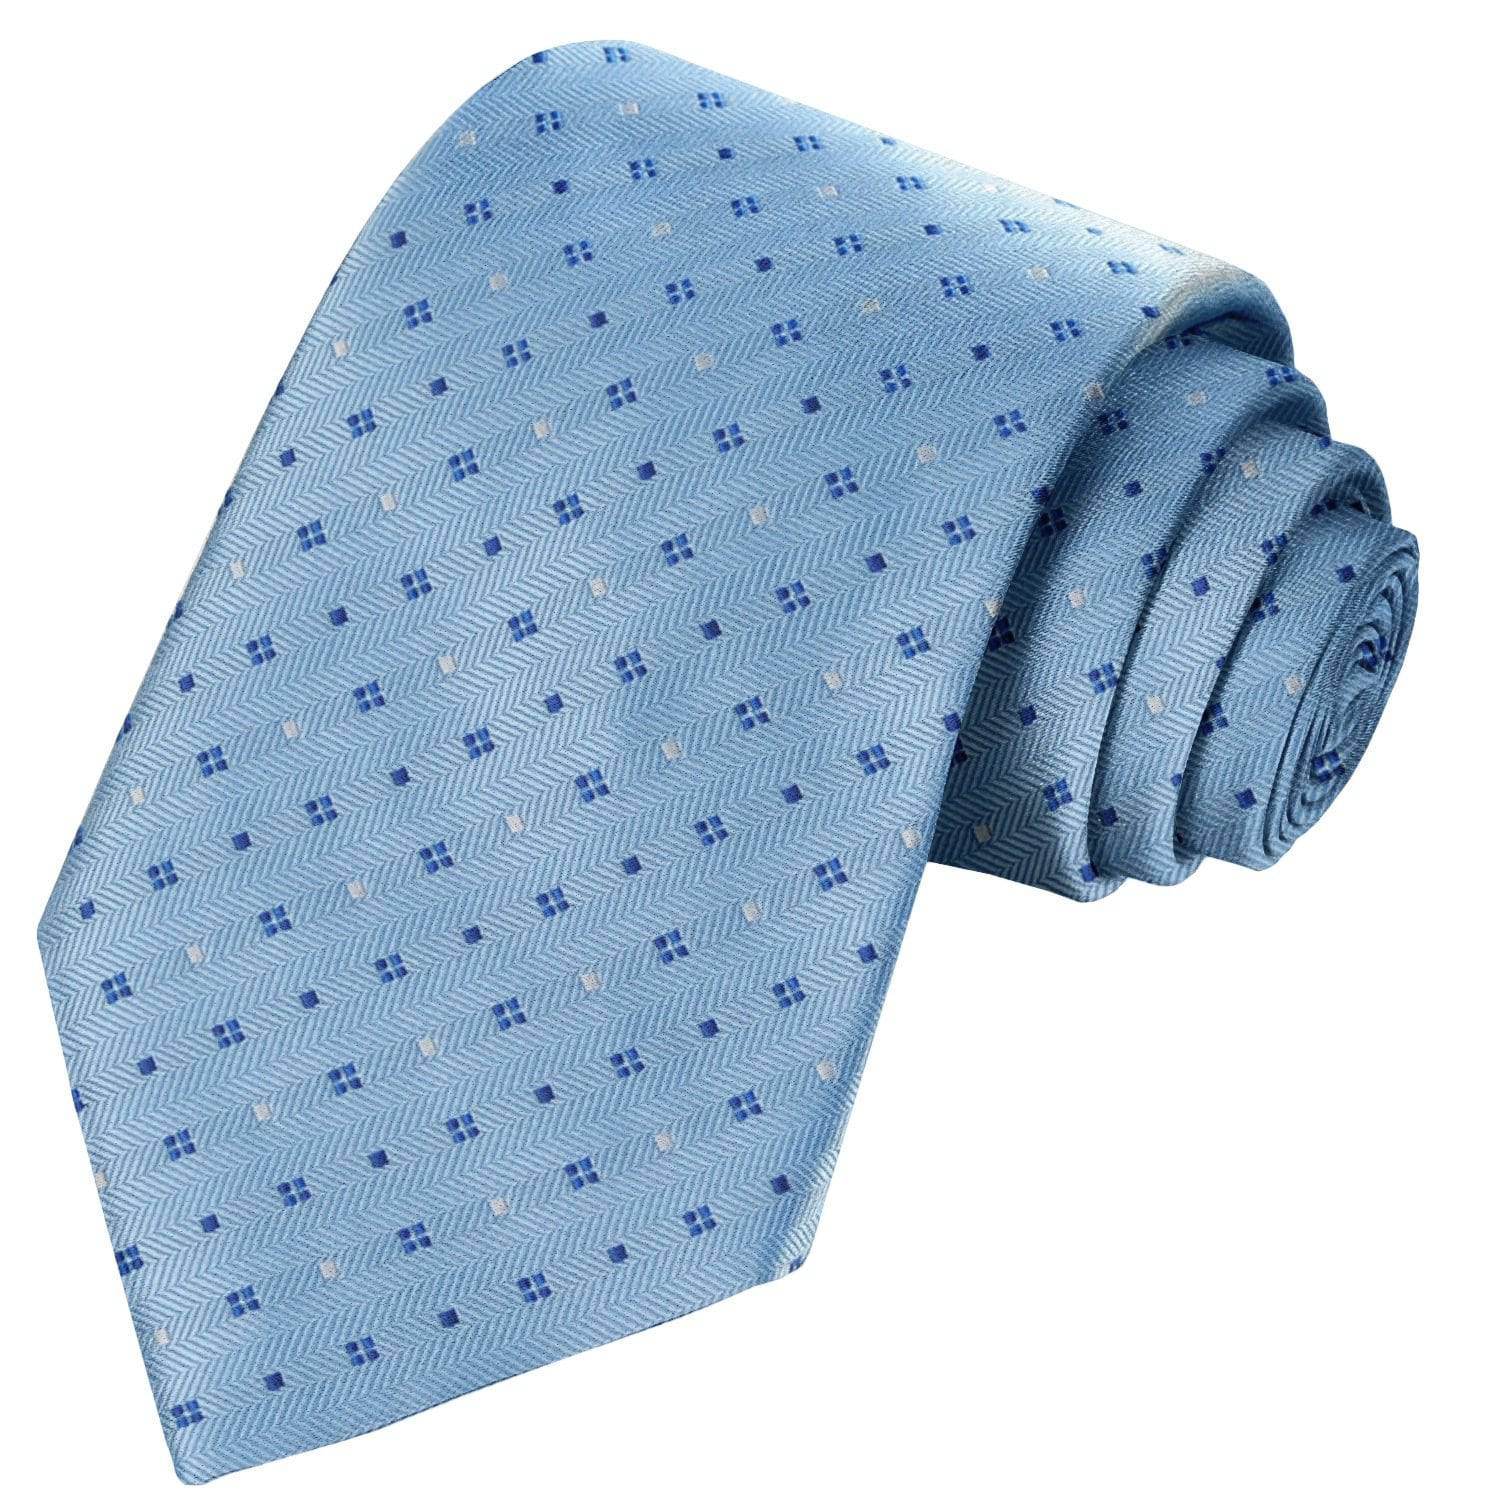 Navy Blue-White Floral on Baby Blue Striped Tie - Tie, bowtie, pocket square  | Kissties